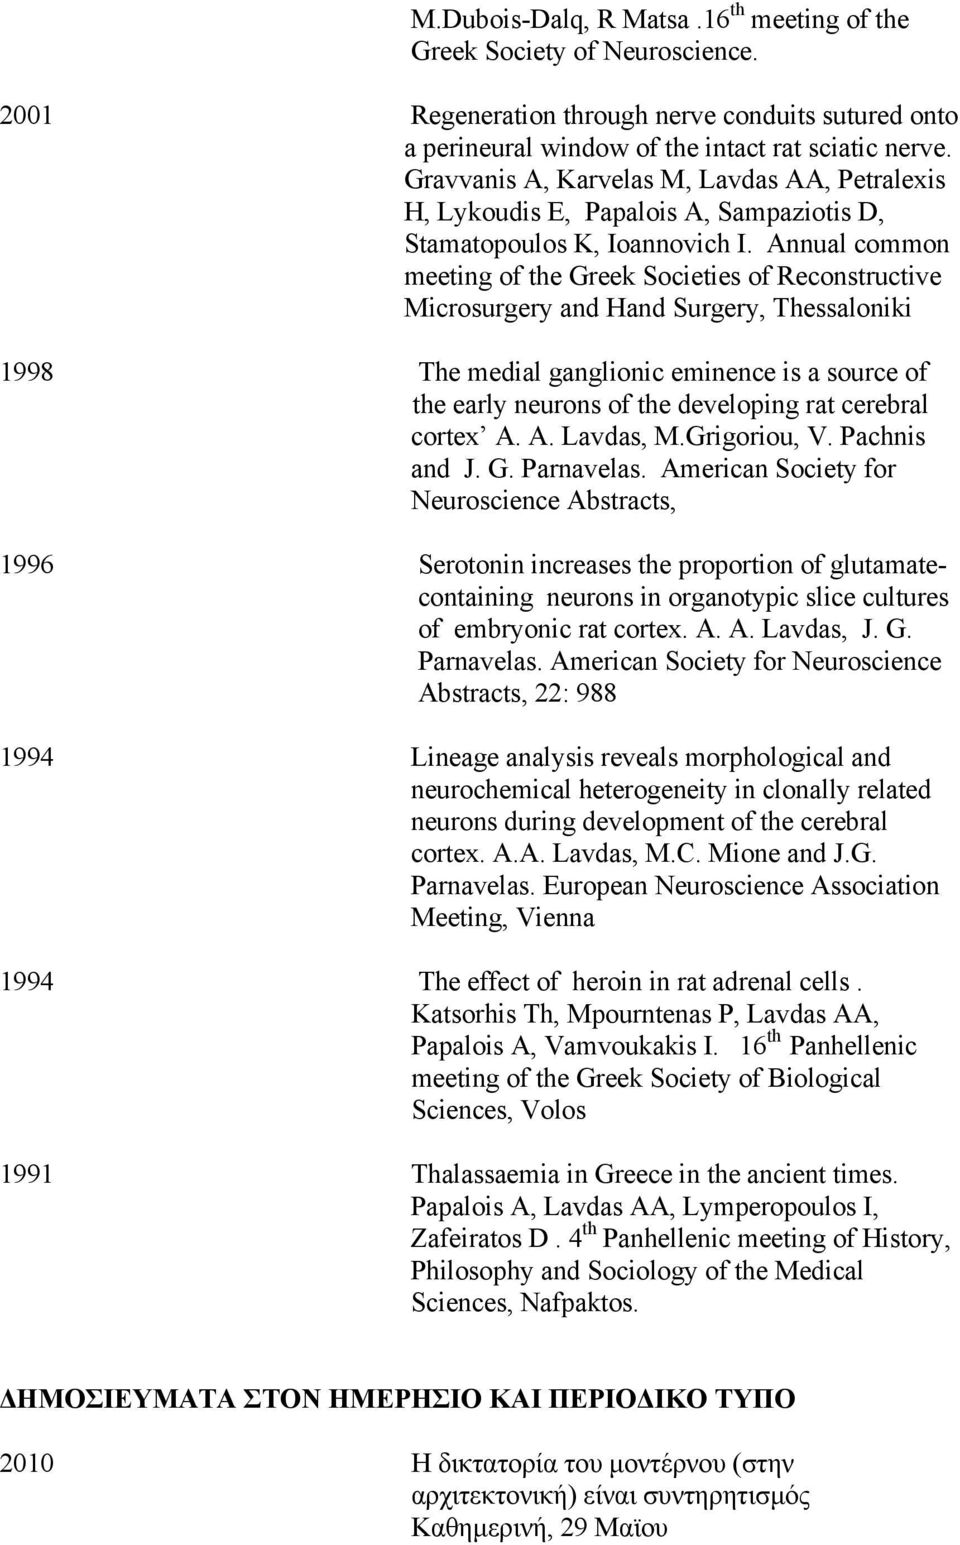 Annual common meeting of the Greek Societies of Reconstructive Microsurgery and Hand Surgery, Thessaloniki 1998 The medial ganglionic eminence is a source of the early neurons of the developing rat